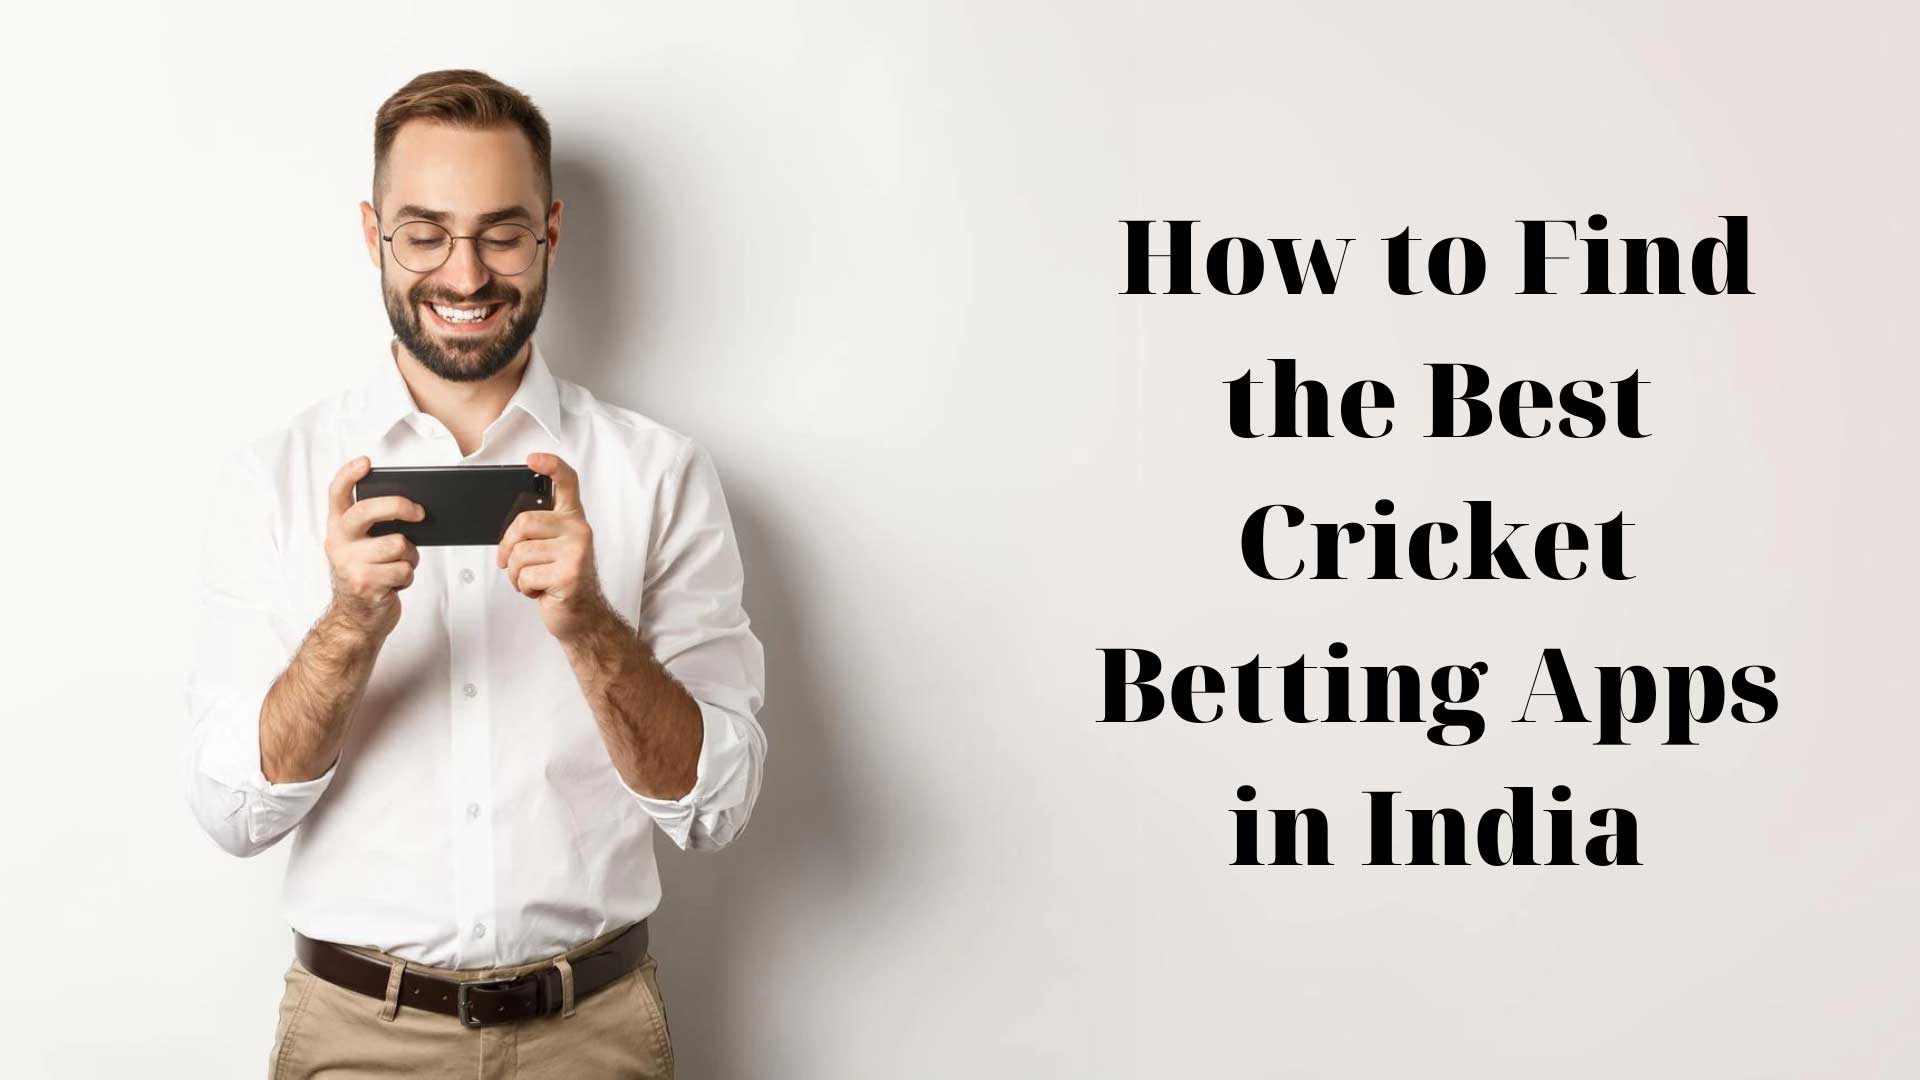 Find the Best Cricket Betting Apps in India